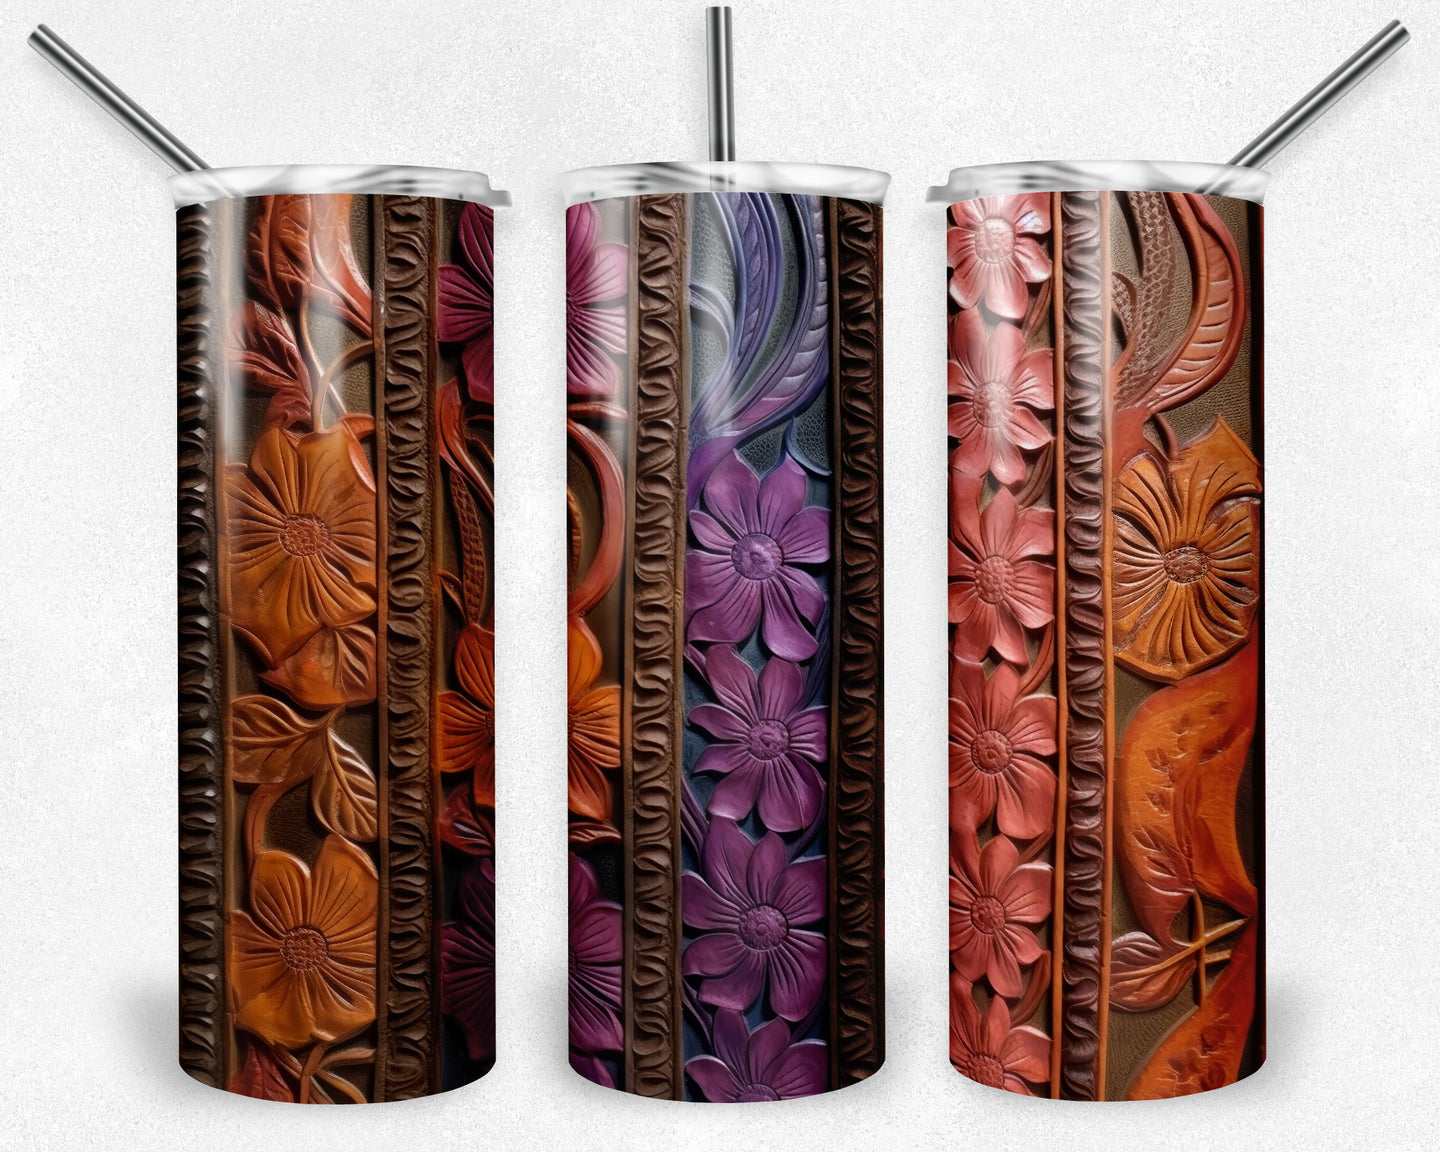 Wood and Flowers Tooled Leather Design